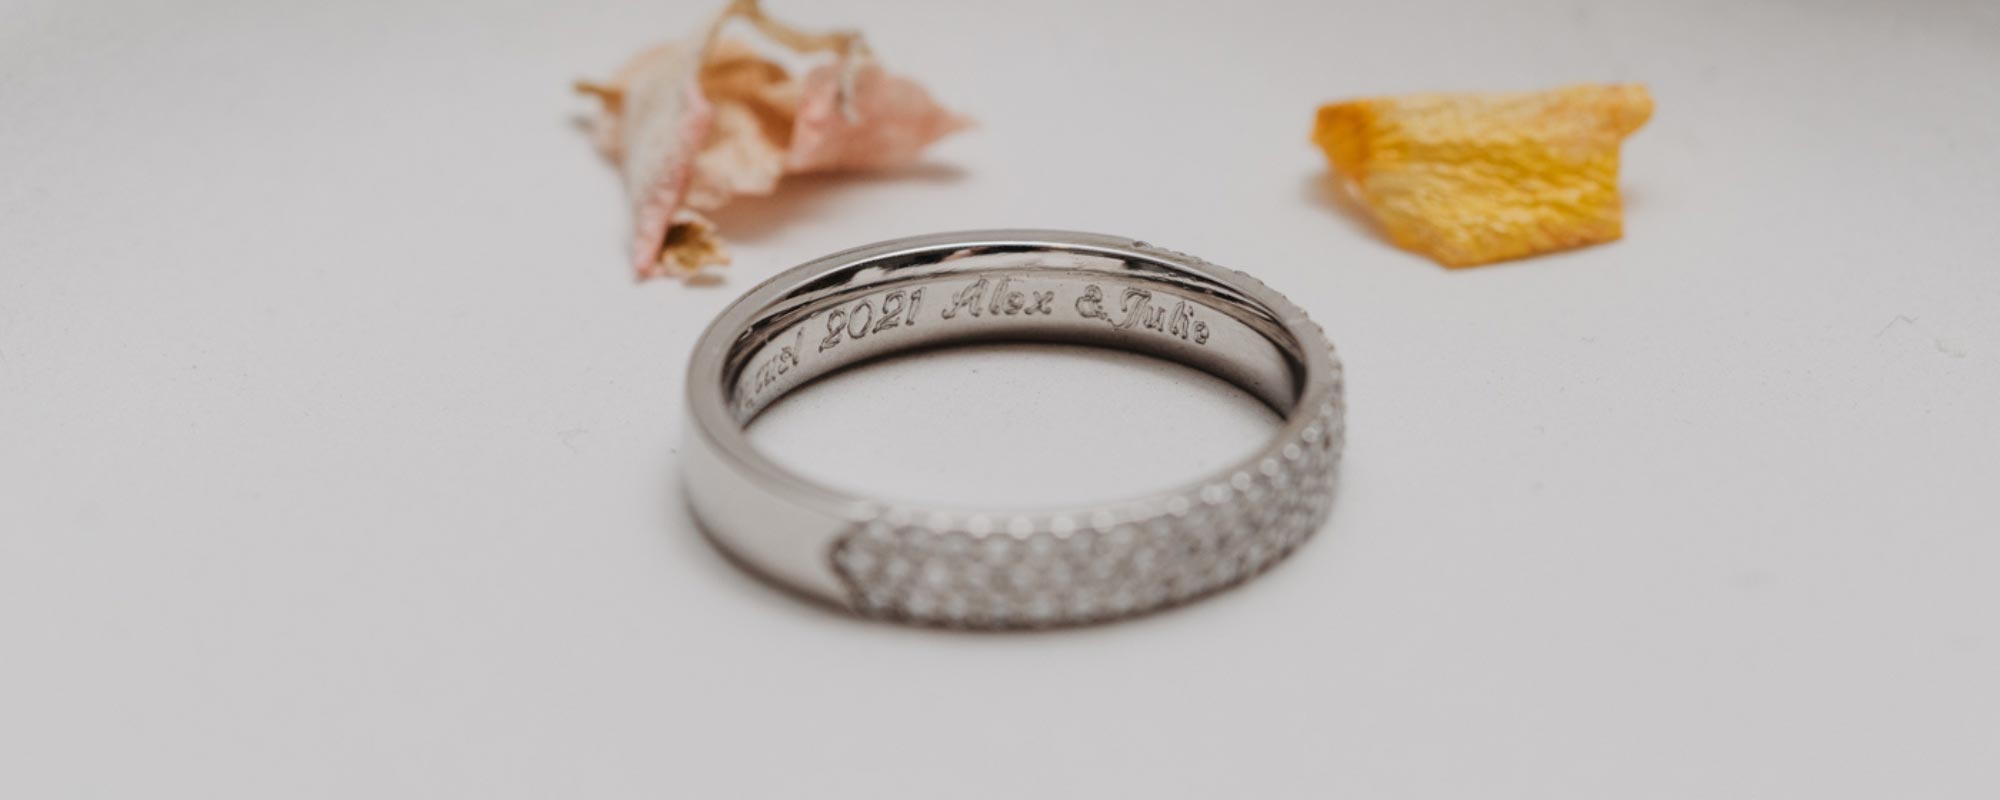 Engraving Ideas for Engagement Rings and Wedding Bands